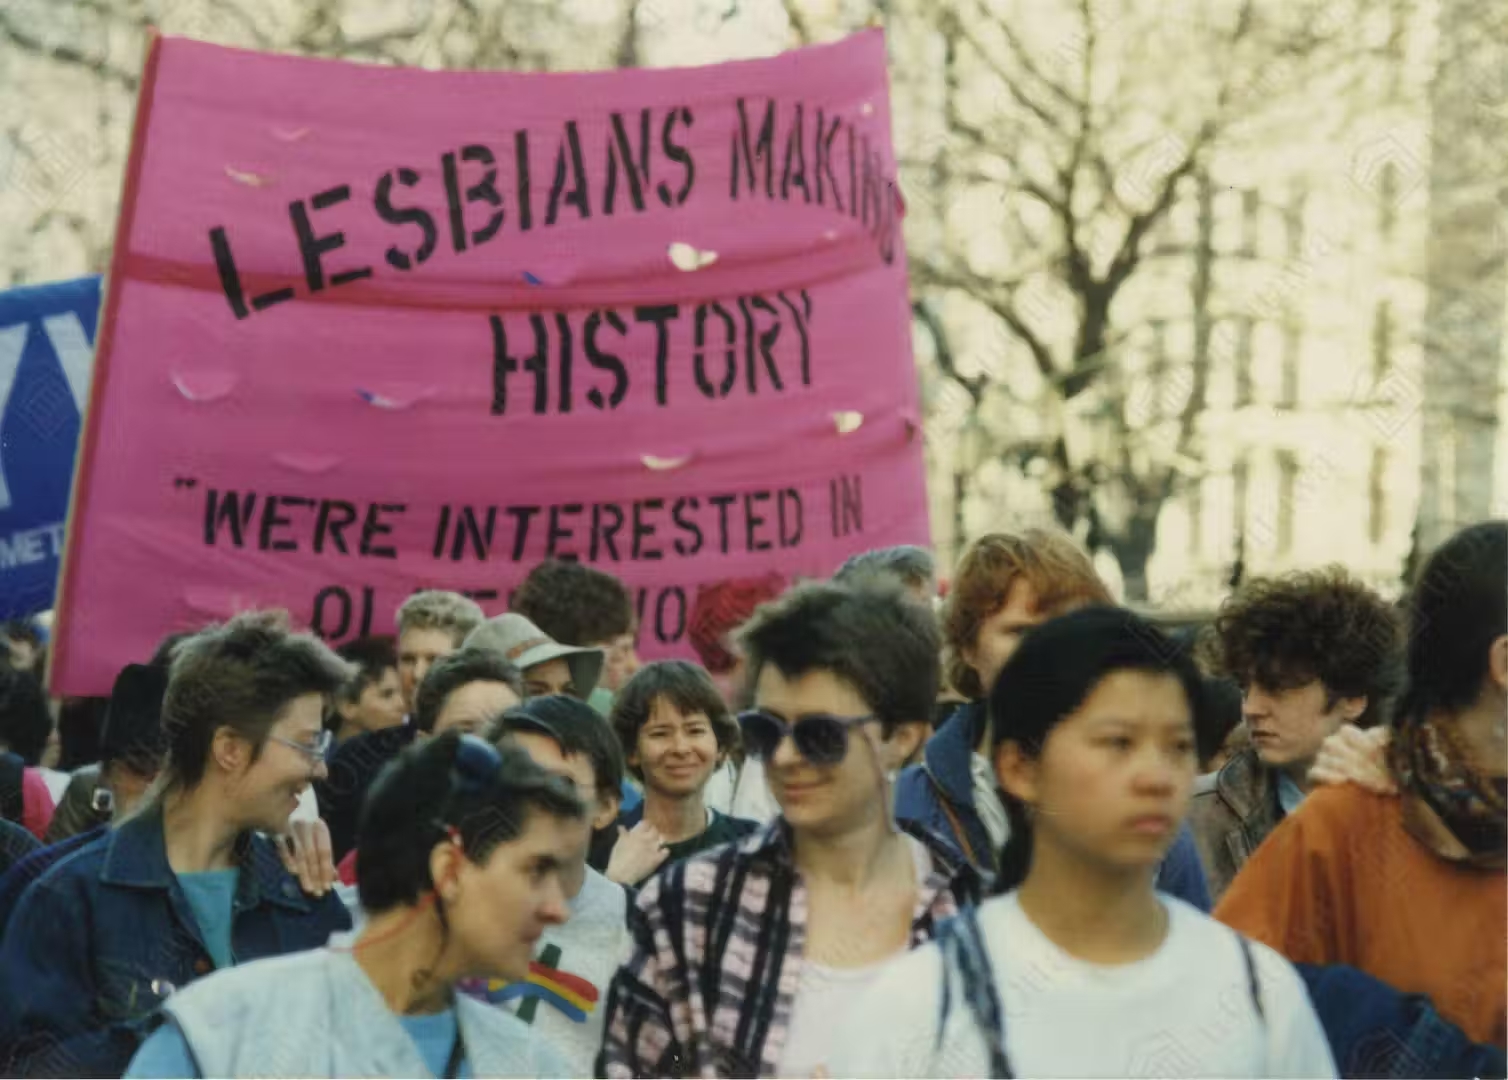 People at a demonstration carry a banner reading: lesbians making history, we're interested in older women."